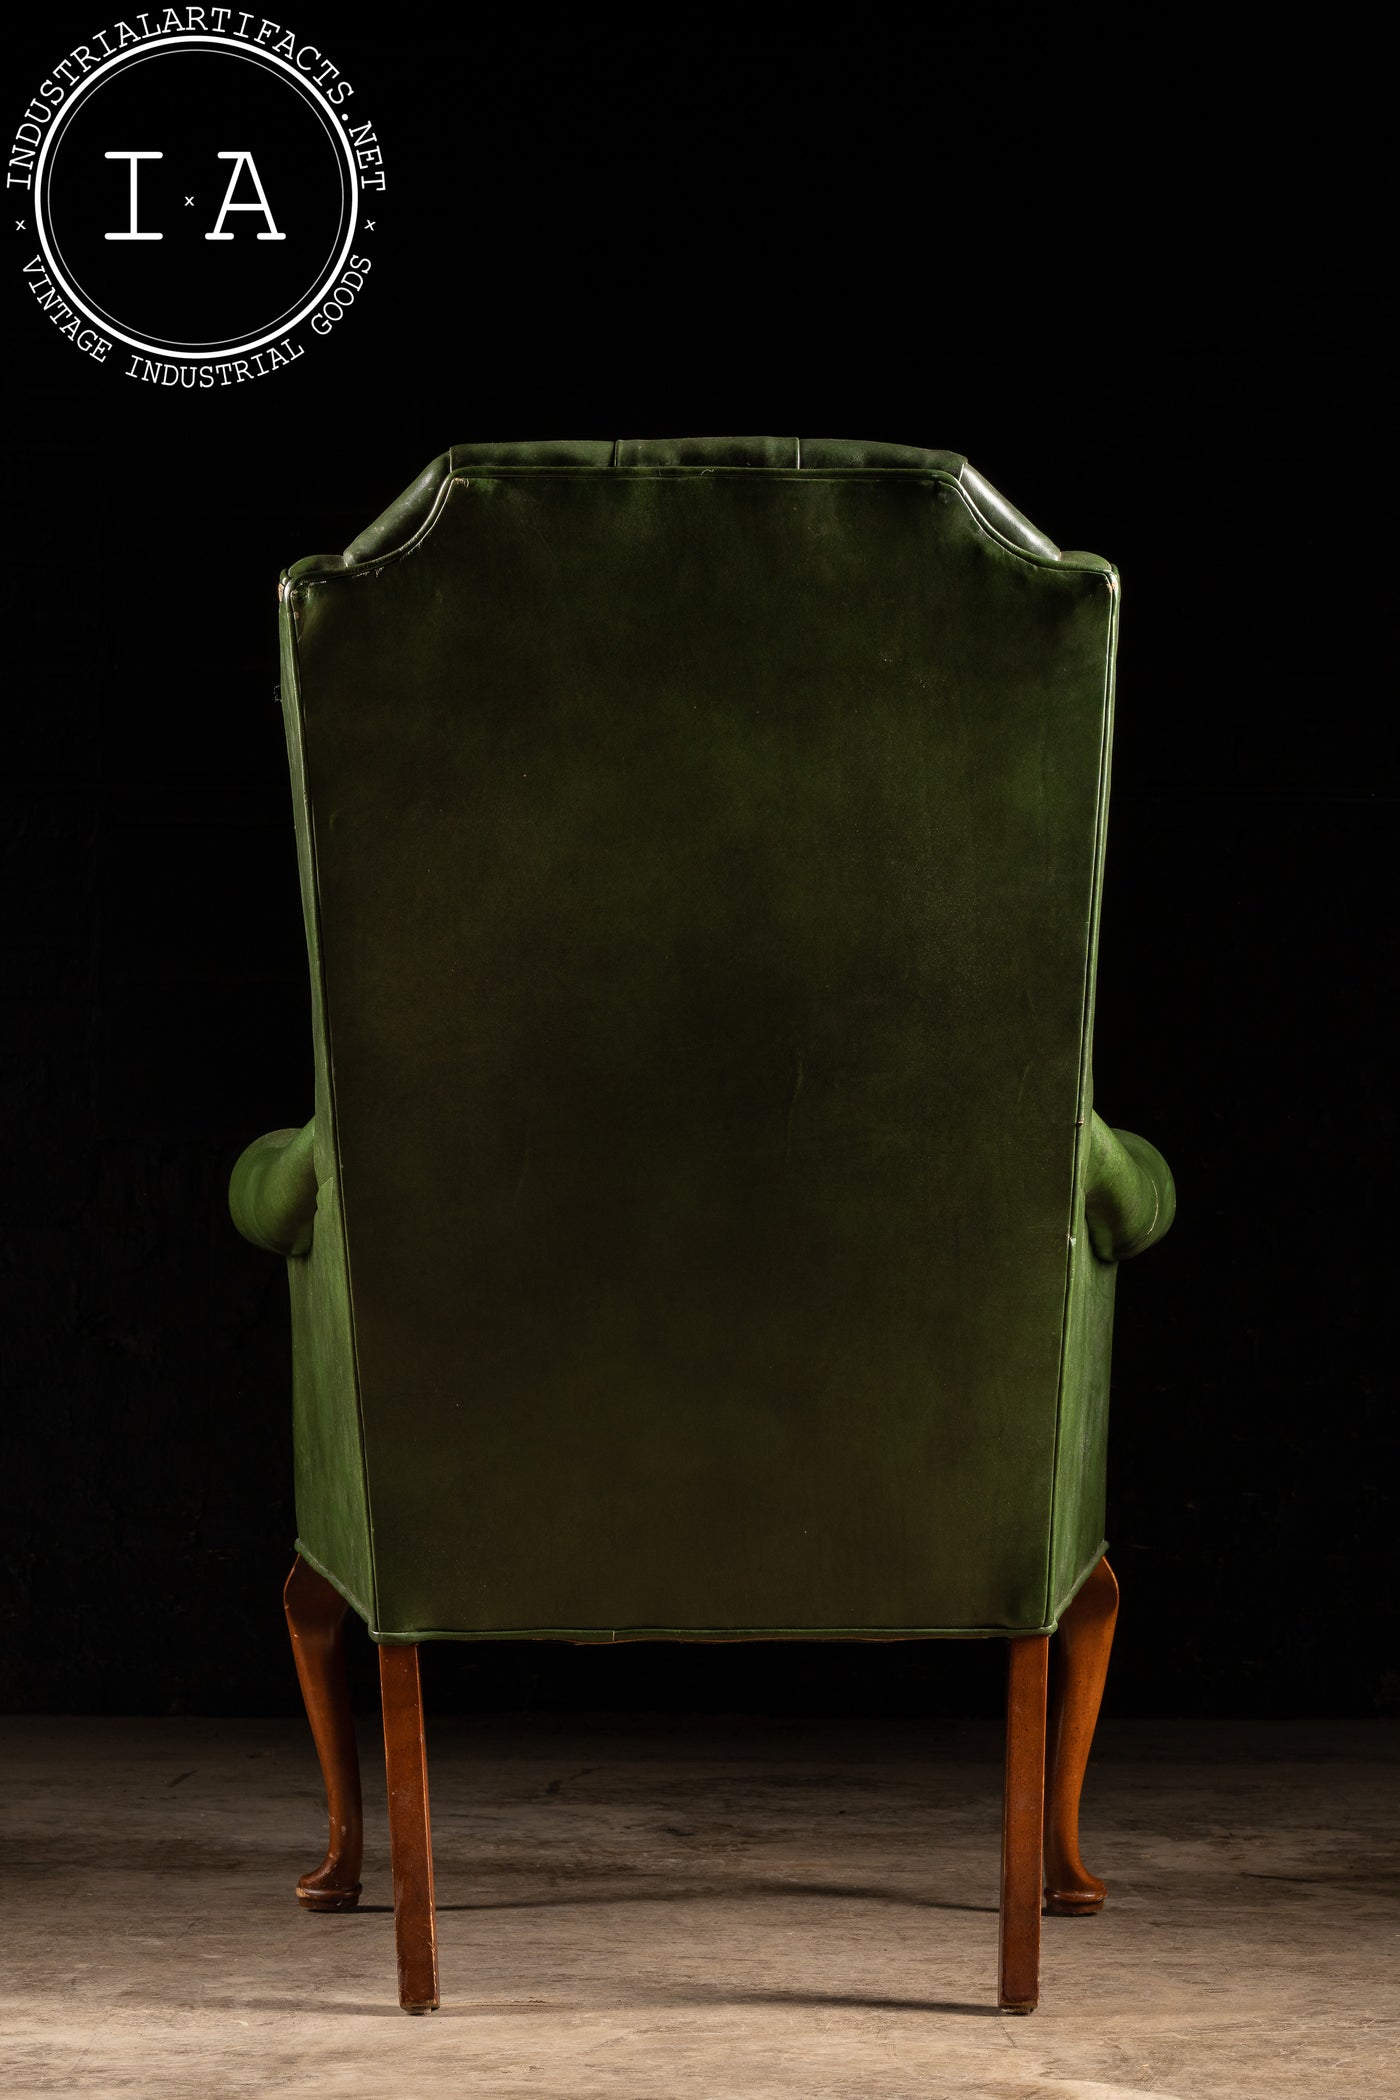 Antique Tufted Leather Armchair in Green